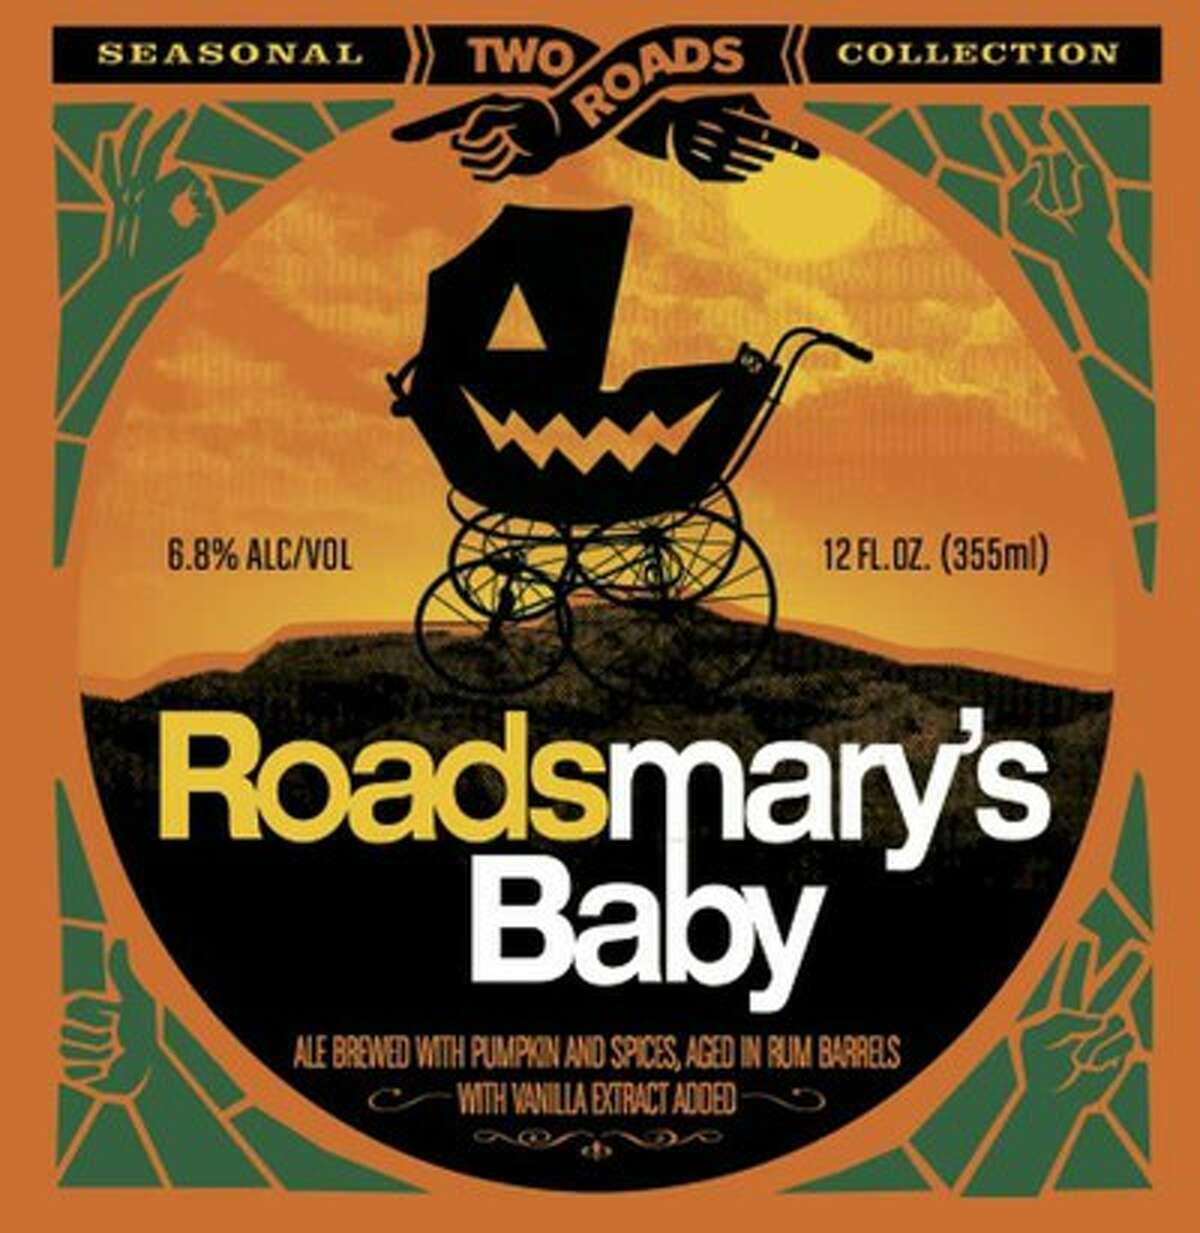 "This is no dream, this is really happening." The annual Two Roads' Roadsmary's Baby Pumpkin Festival will be held on Saturday. Find out more.